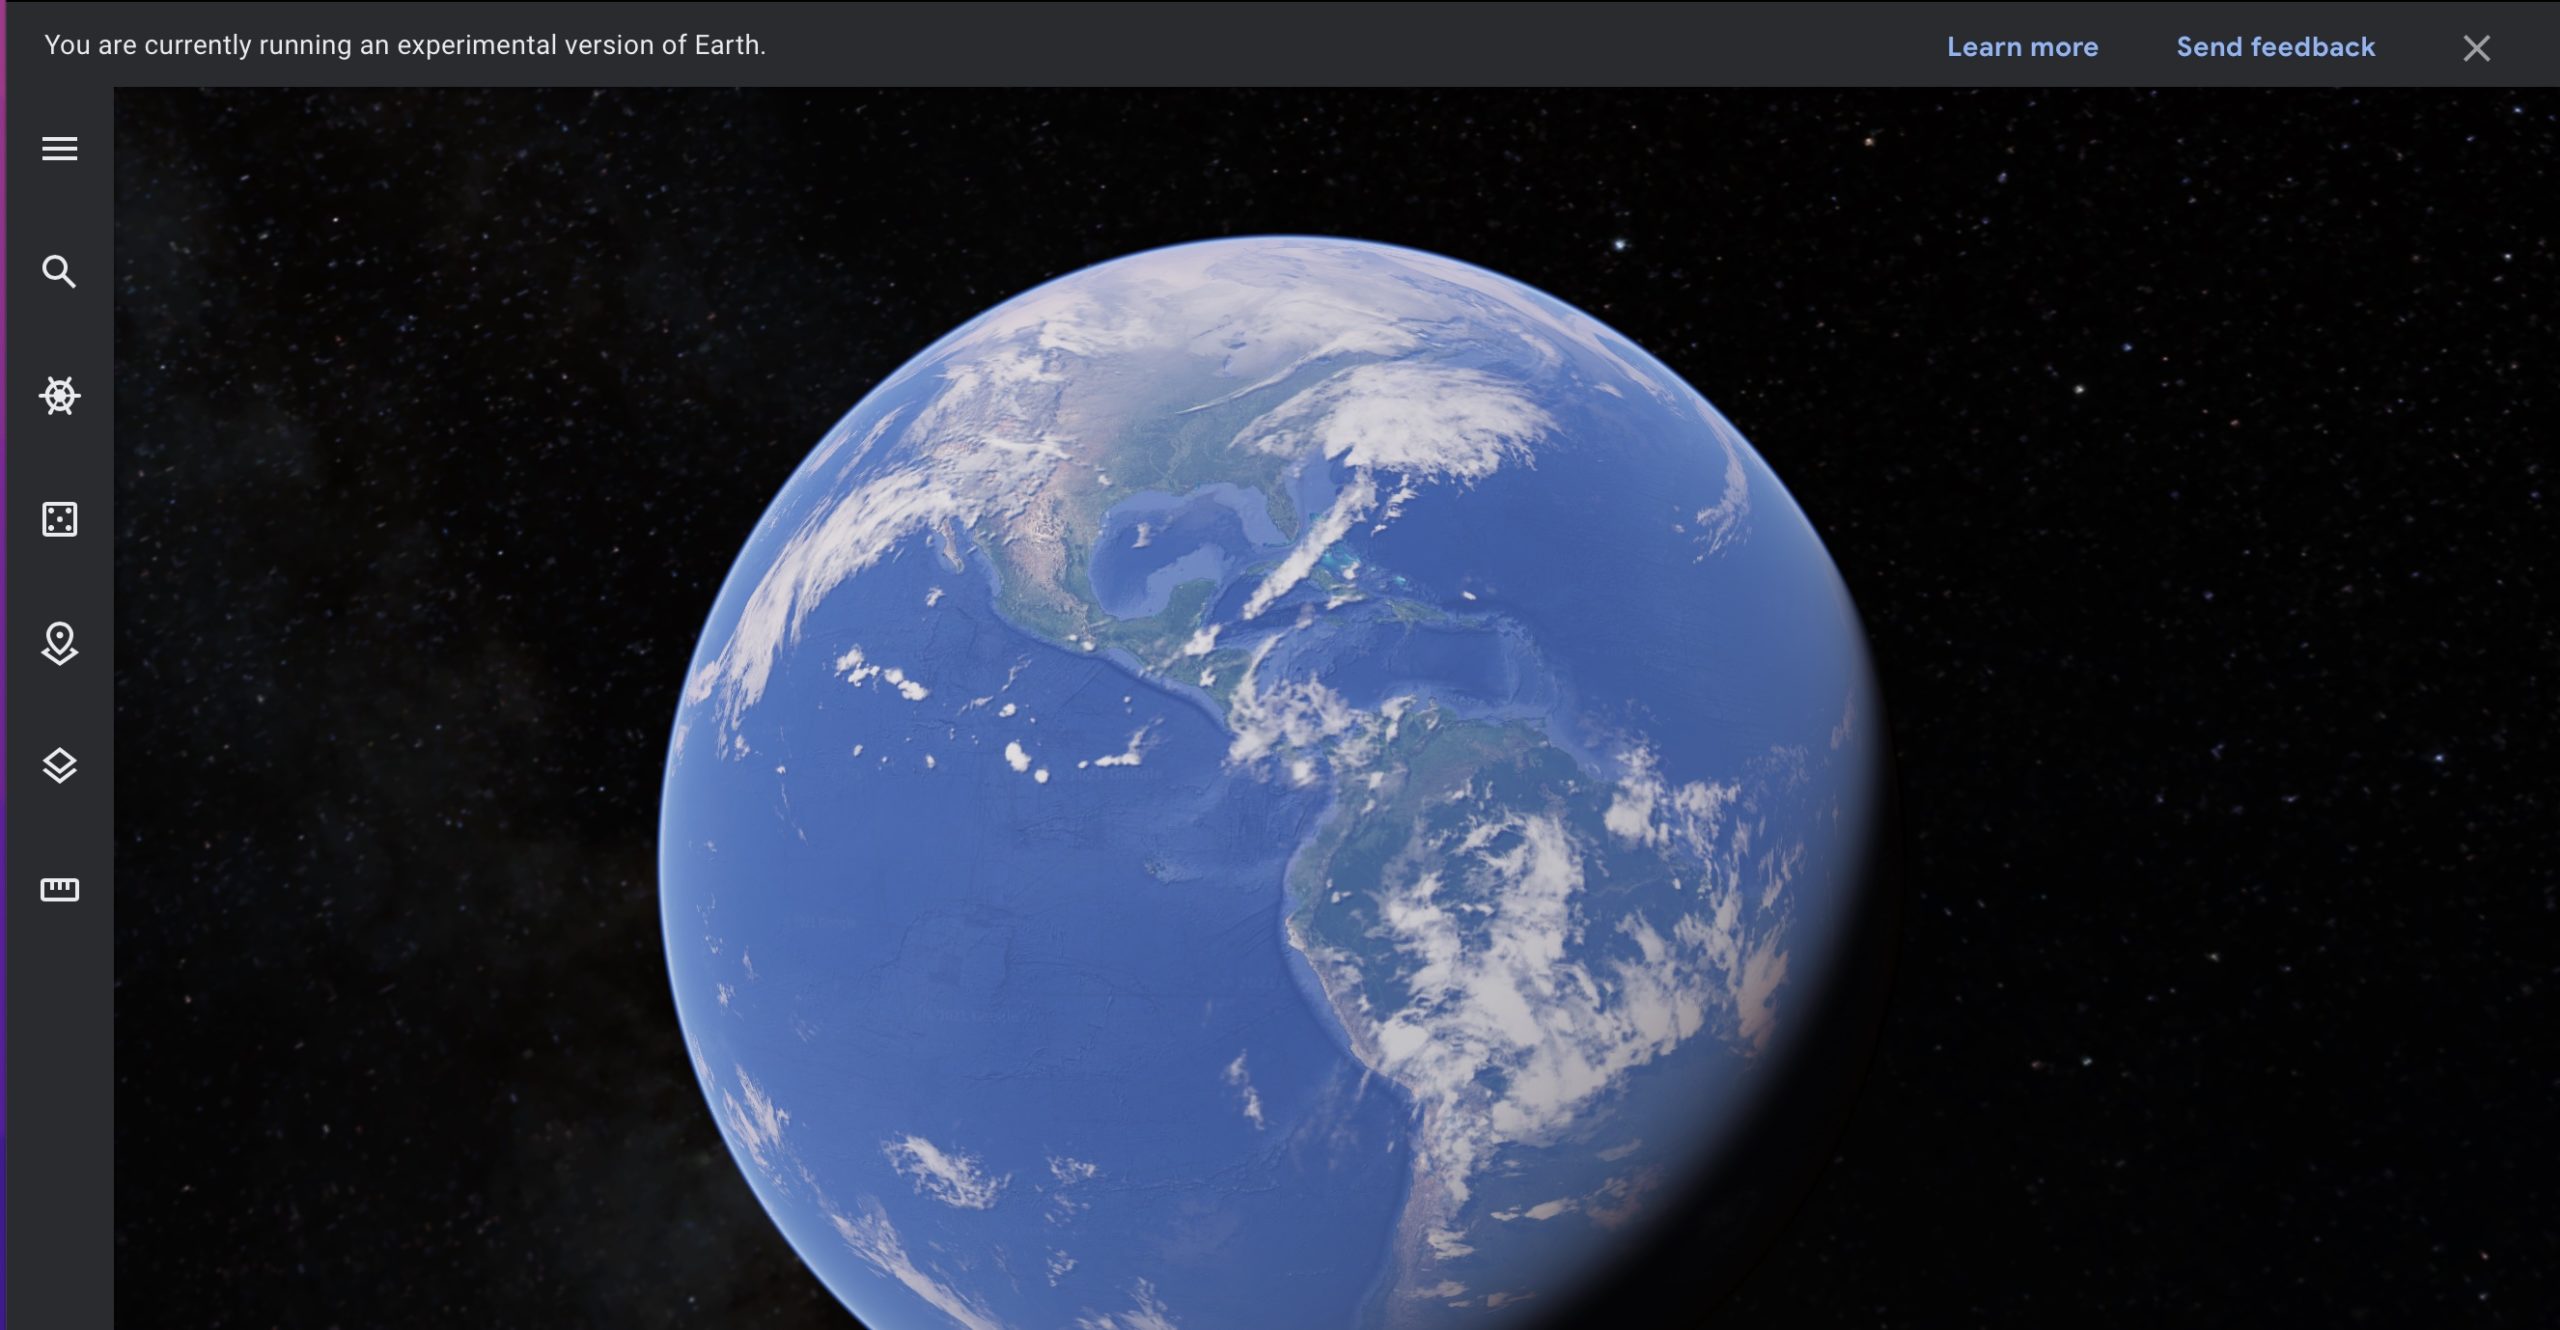 Find out the fate of coastal cities due to sea level rise, using Google Earth